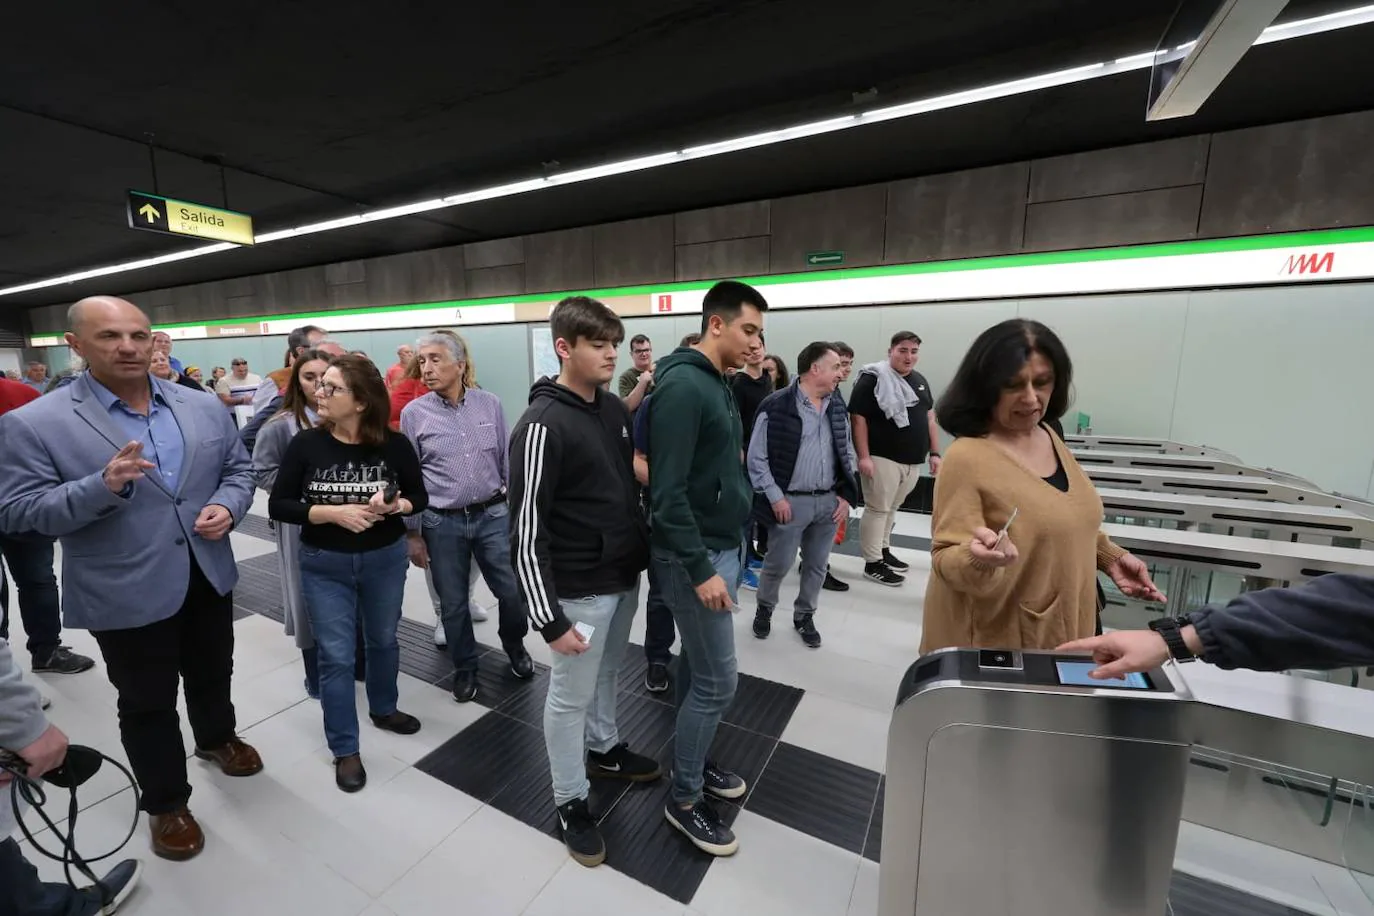 Malaga Metro arrives in city centre, in pictures